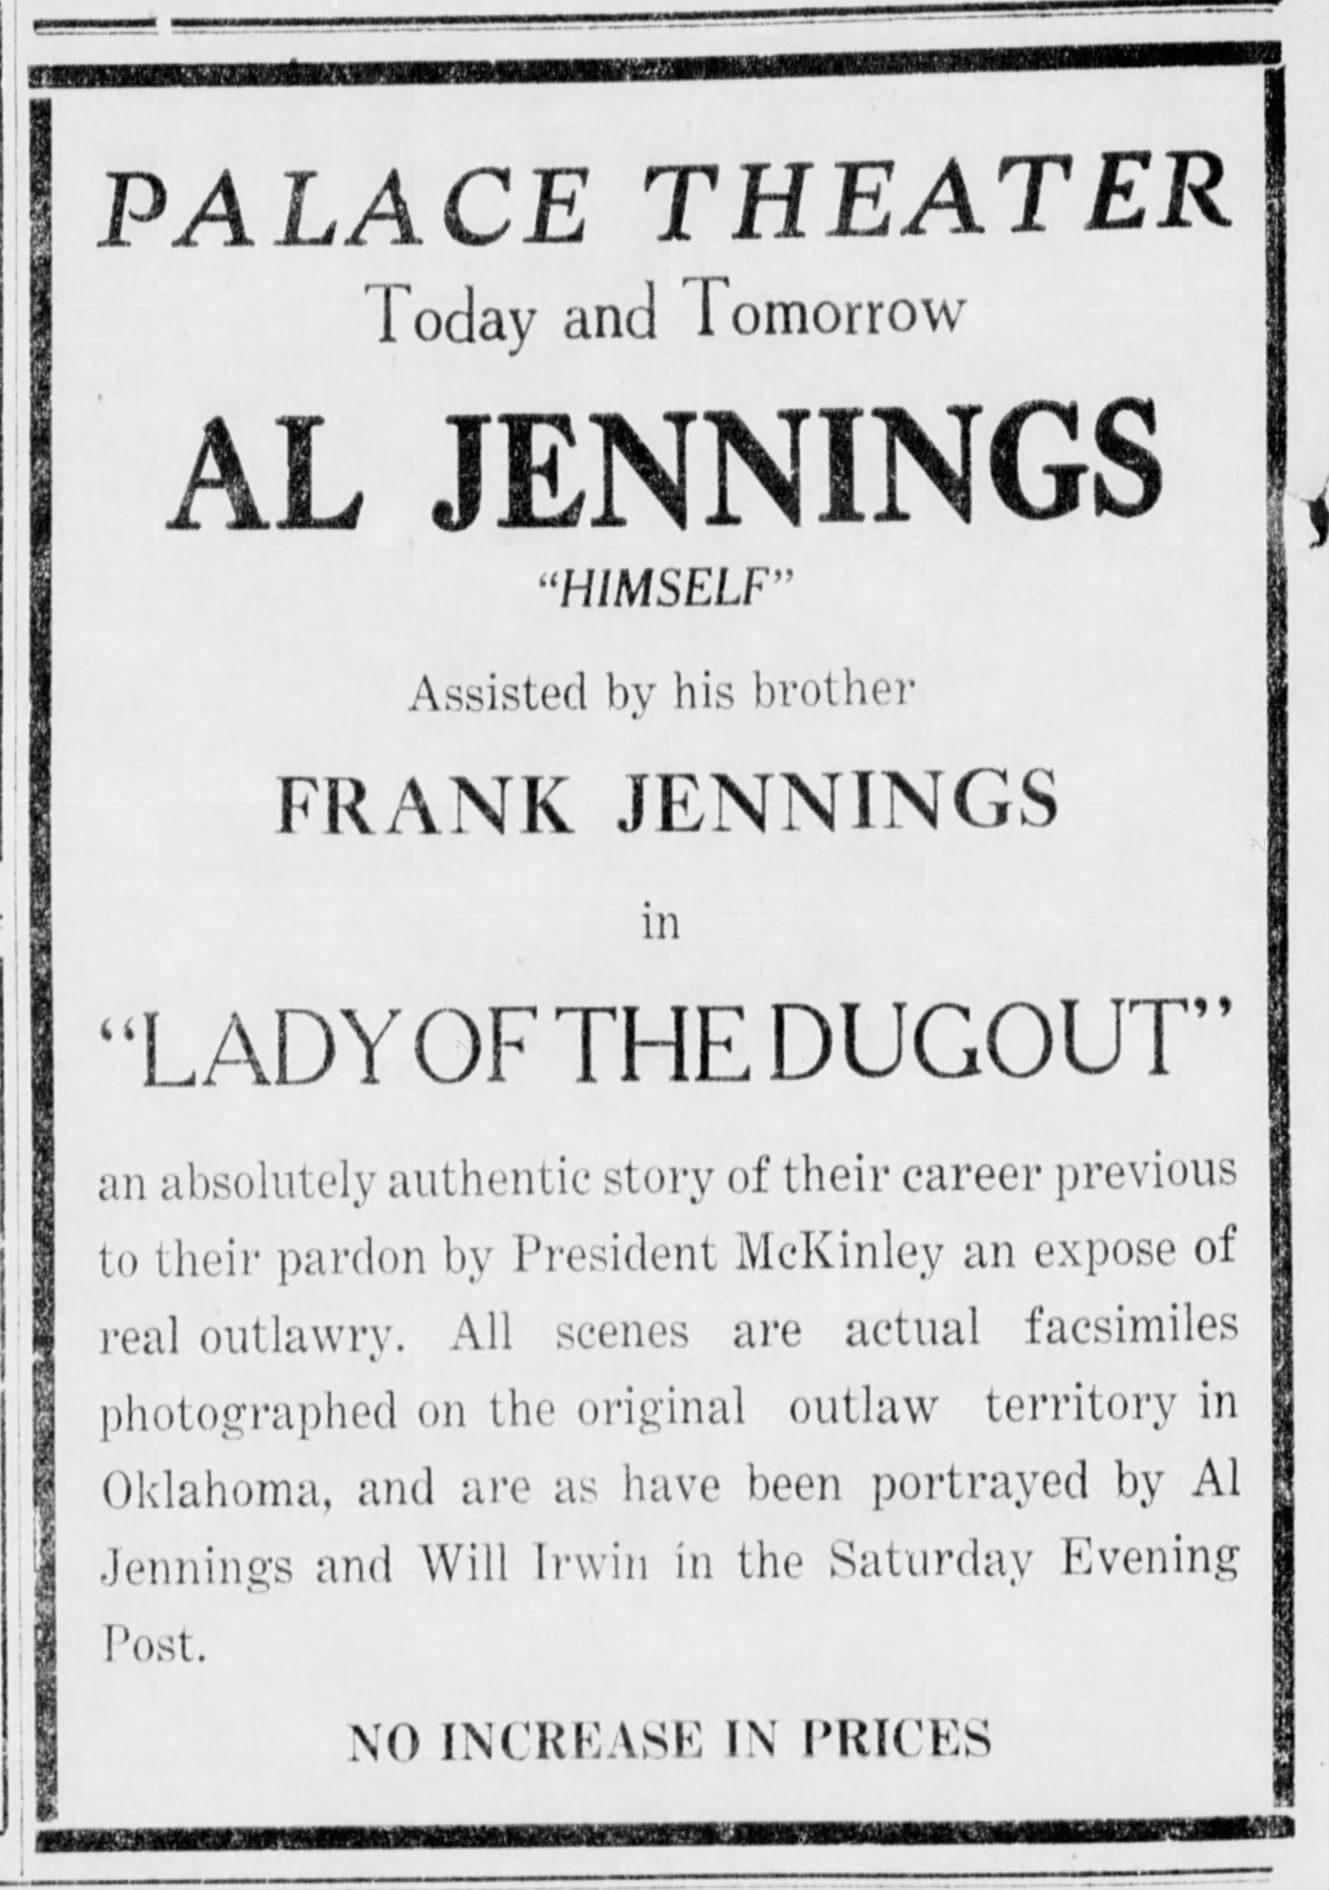 Newspaper ad for "Lady of the Dugout"; The Daily Ardmoreite; 12 Jan 1919, p. 6